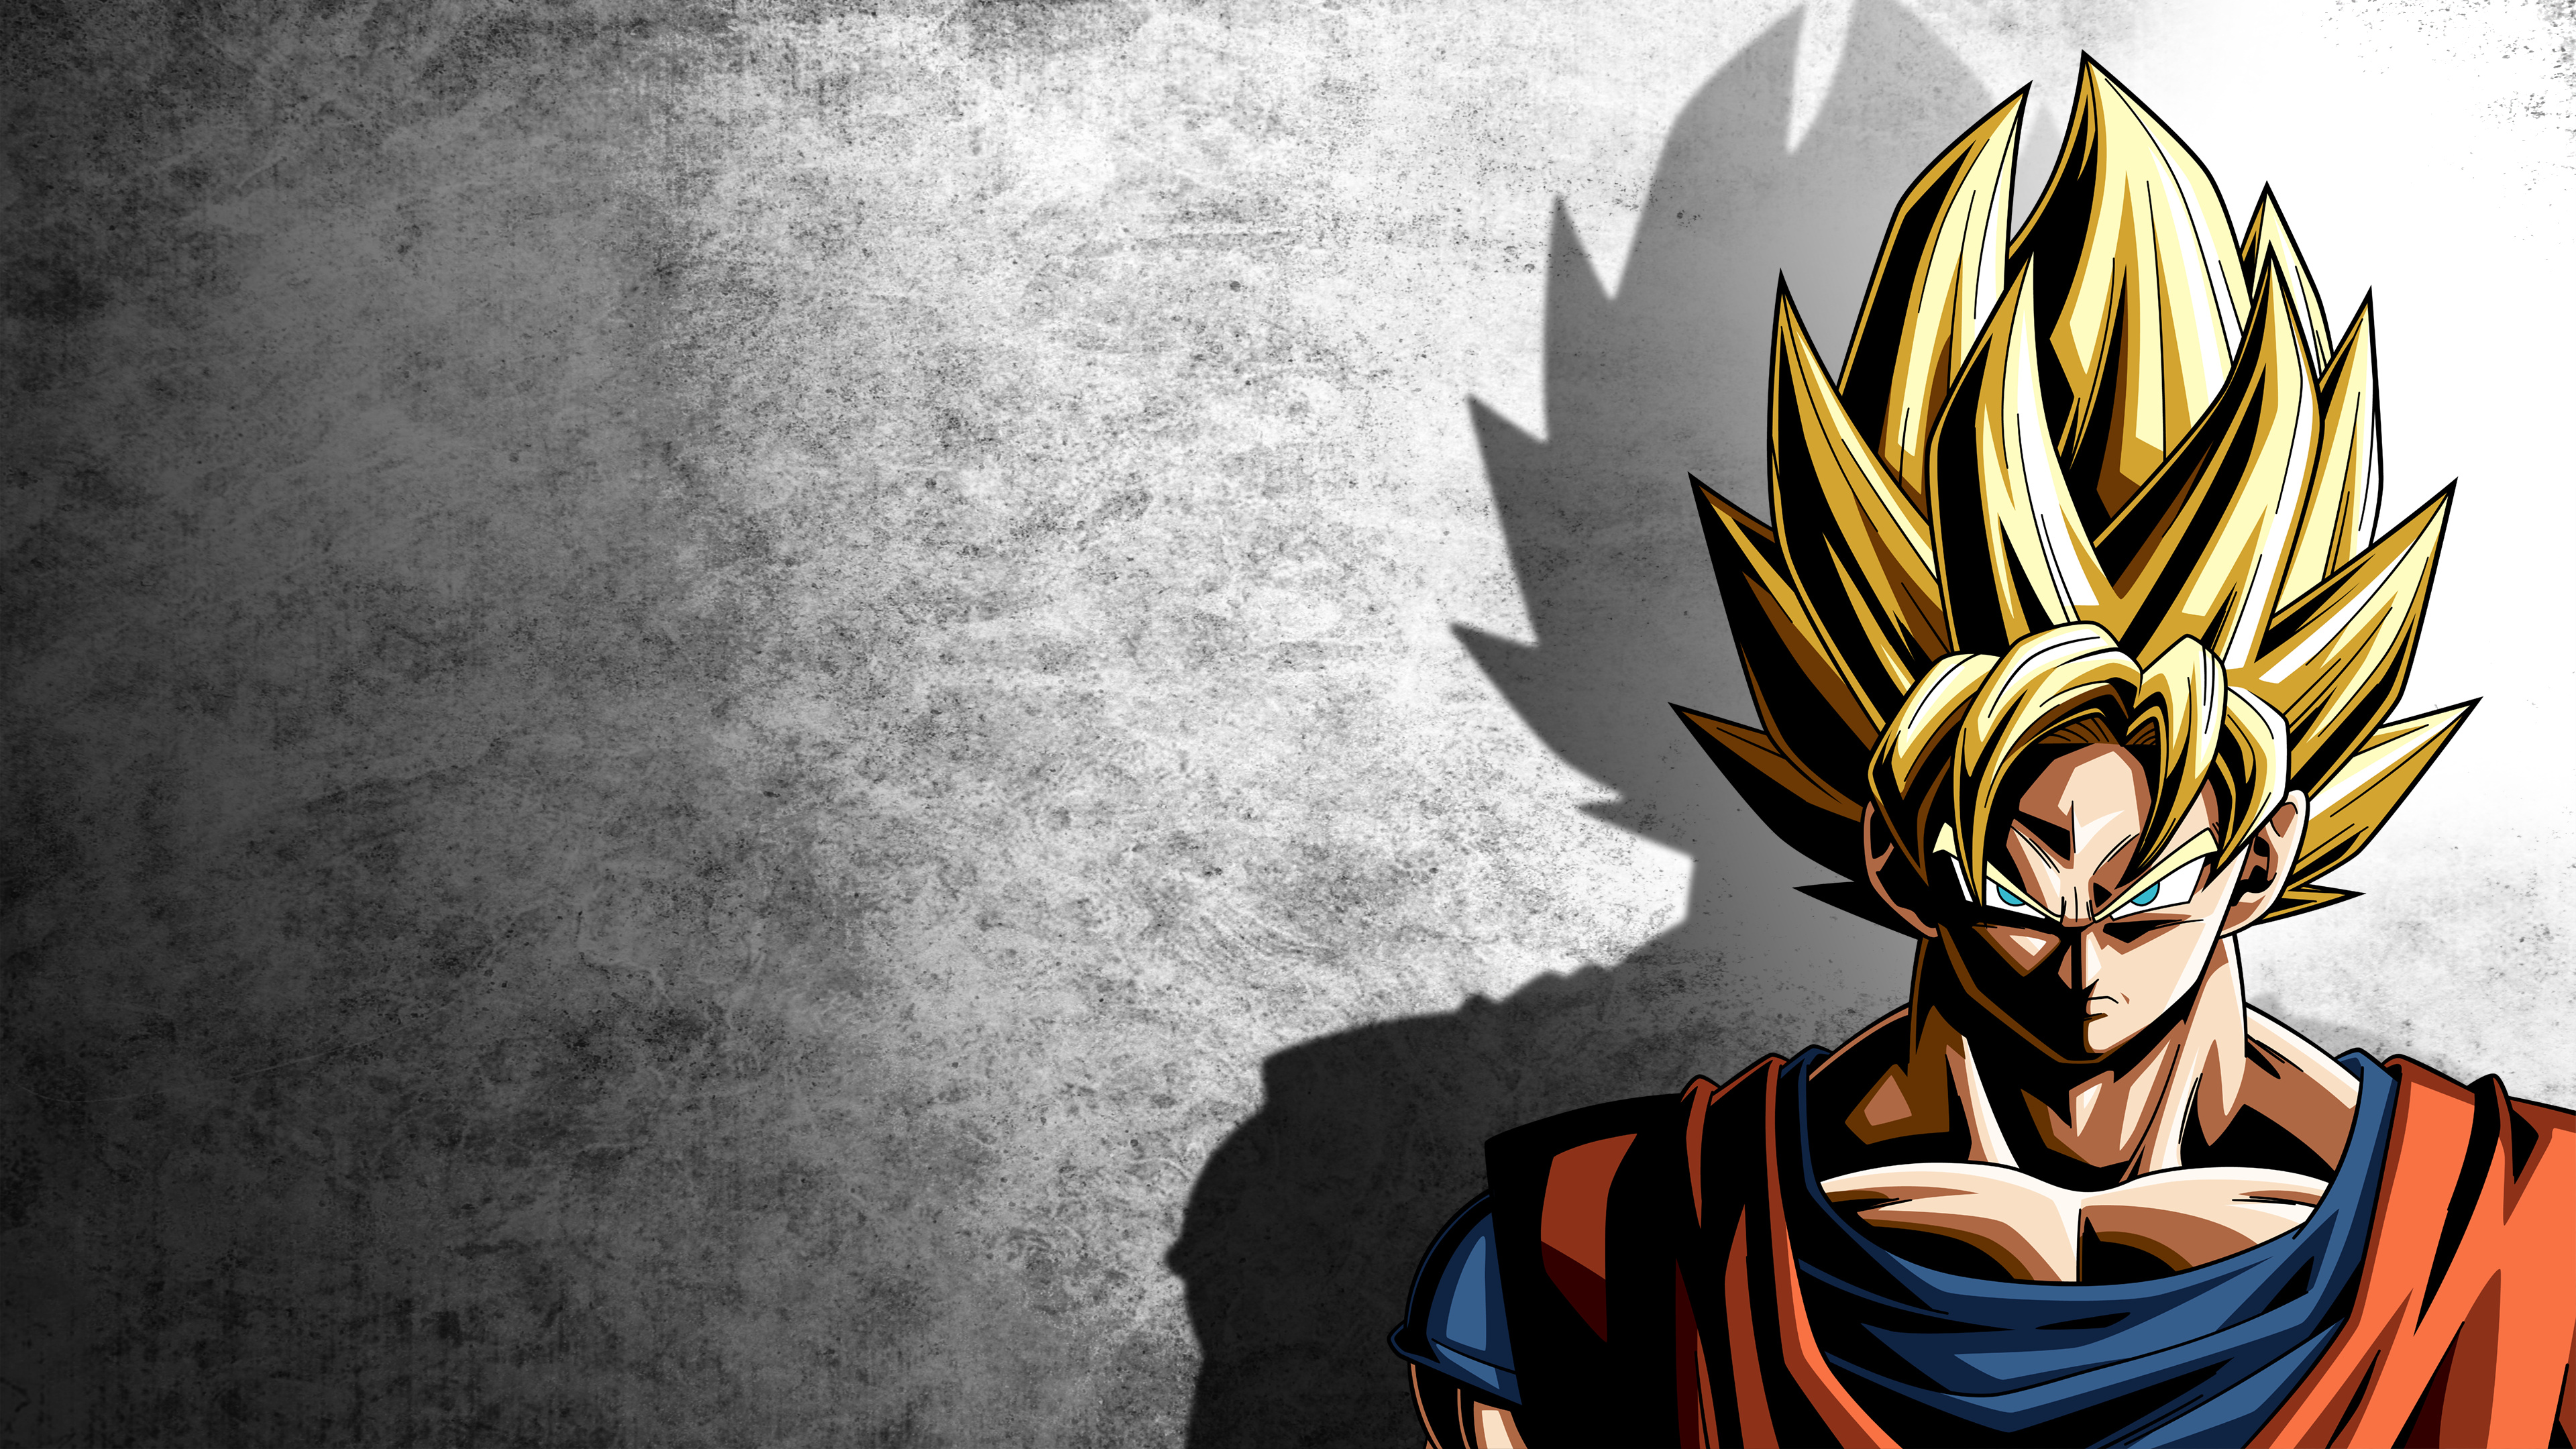 Dragon Ball Z Abridged, Action-packed wallpapers, Exciting battles, Epic moments, 3840x2160 4K Desktop